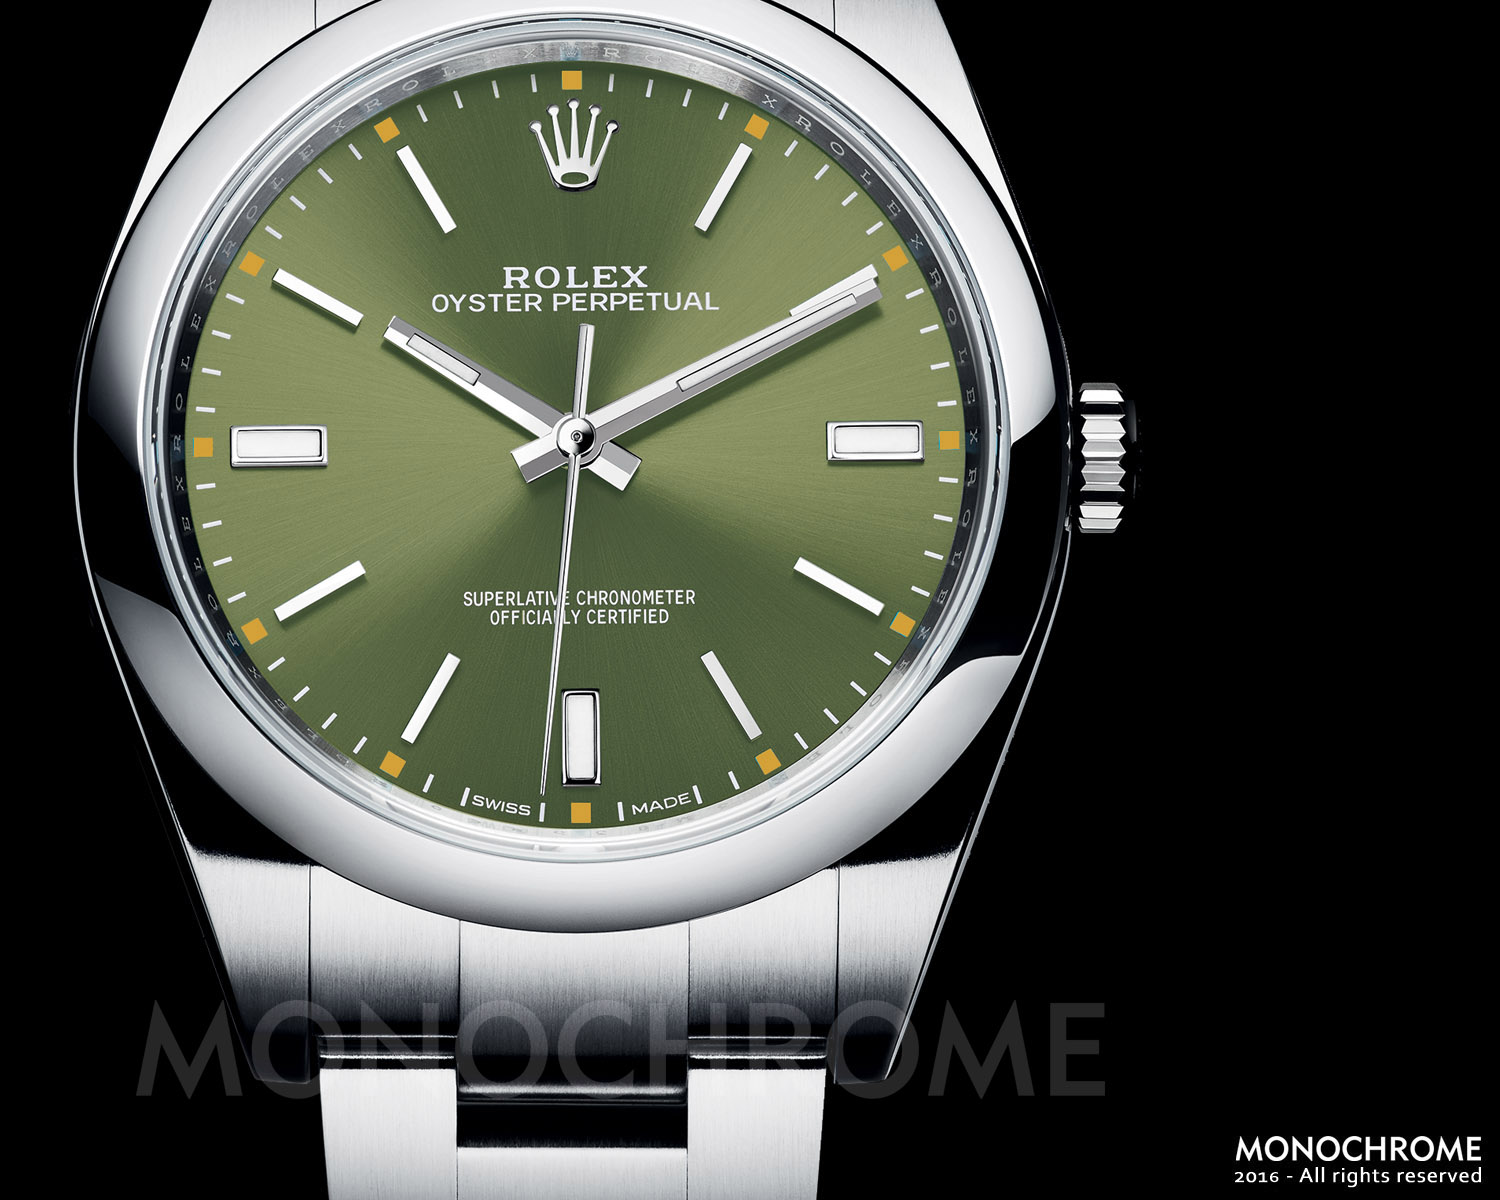 Rolex Oyster Perpetual 39 114300 olive green - Rolex Baselworld 2016 - Rolex Predictions 2016 - Monochrome